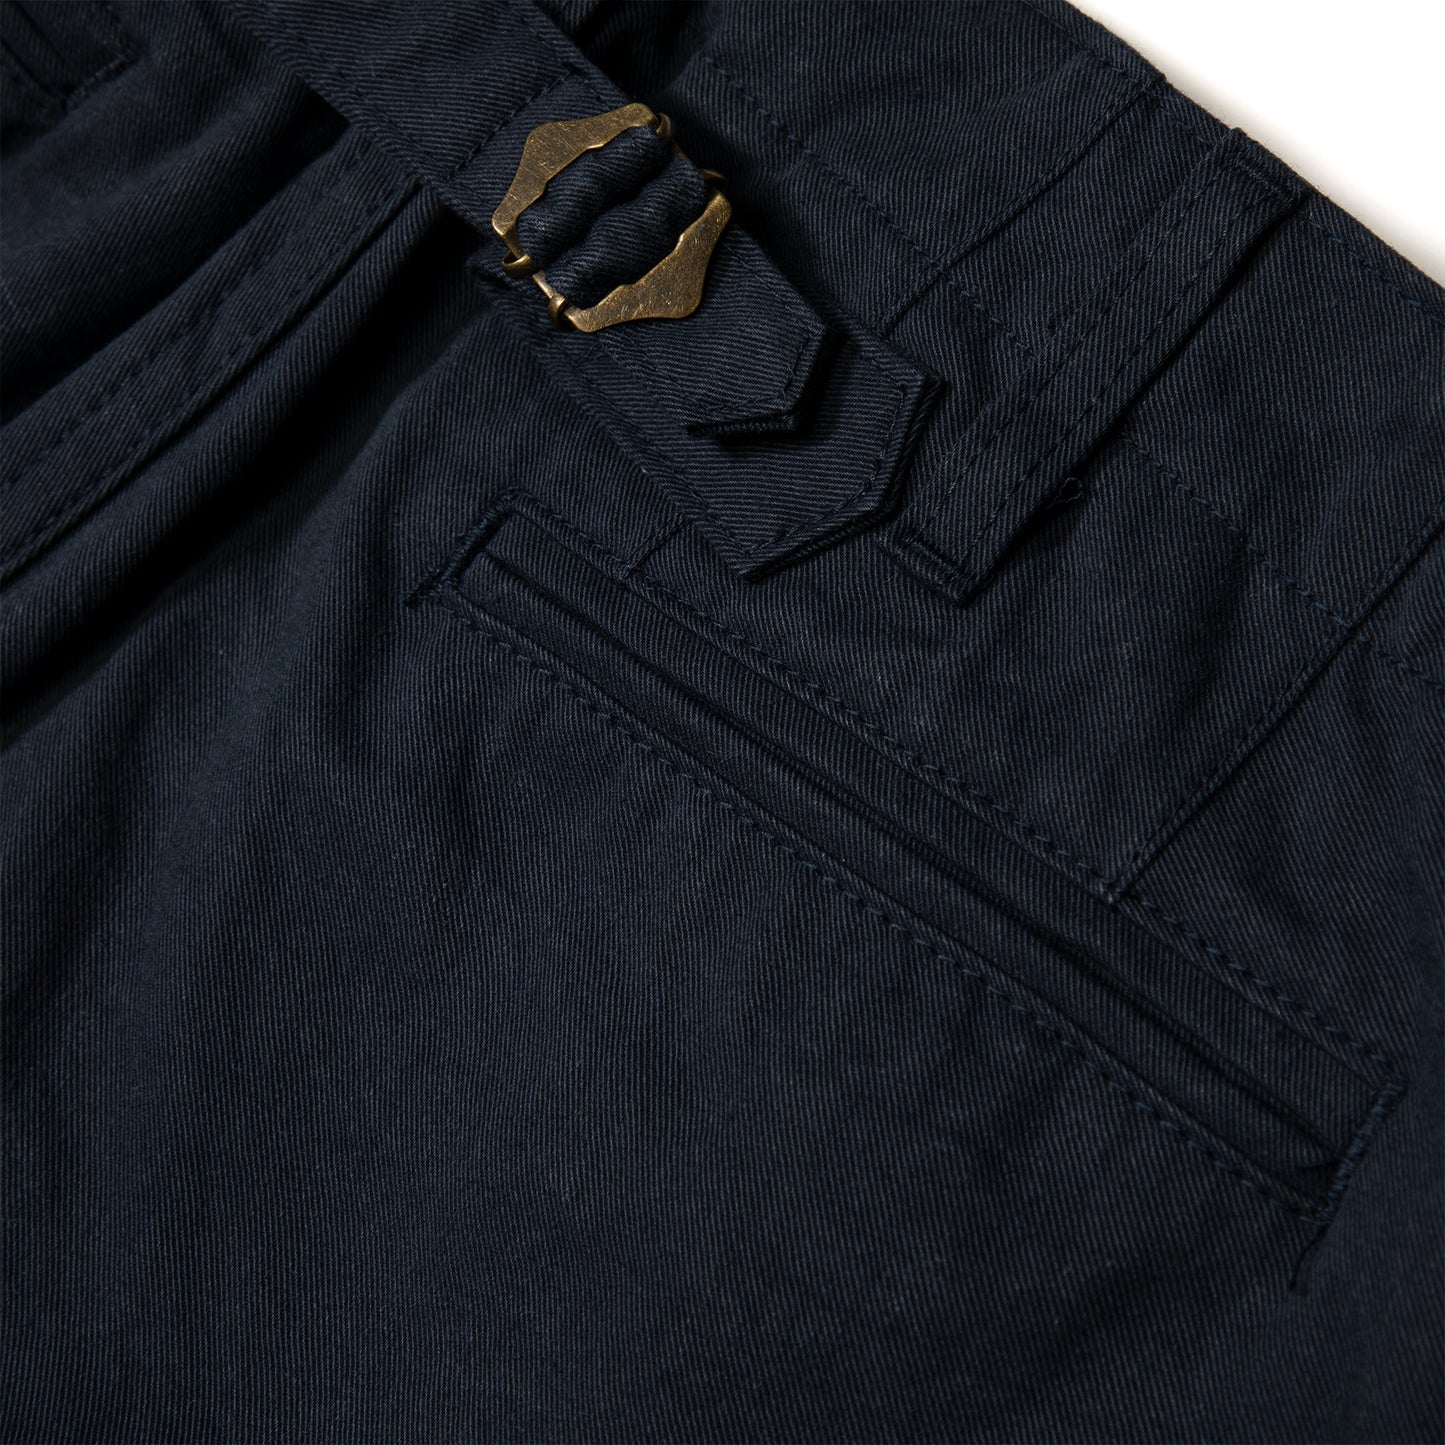 Brownstone Chain Stitched Trouser (Navy)